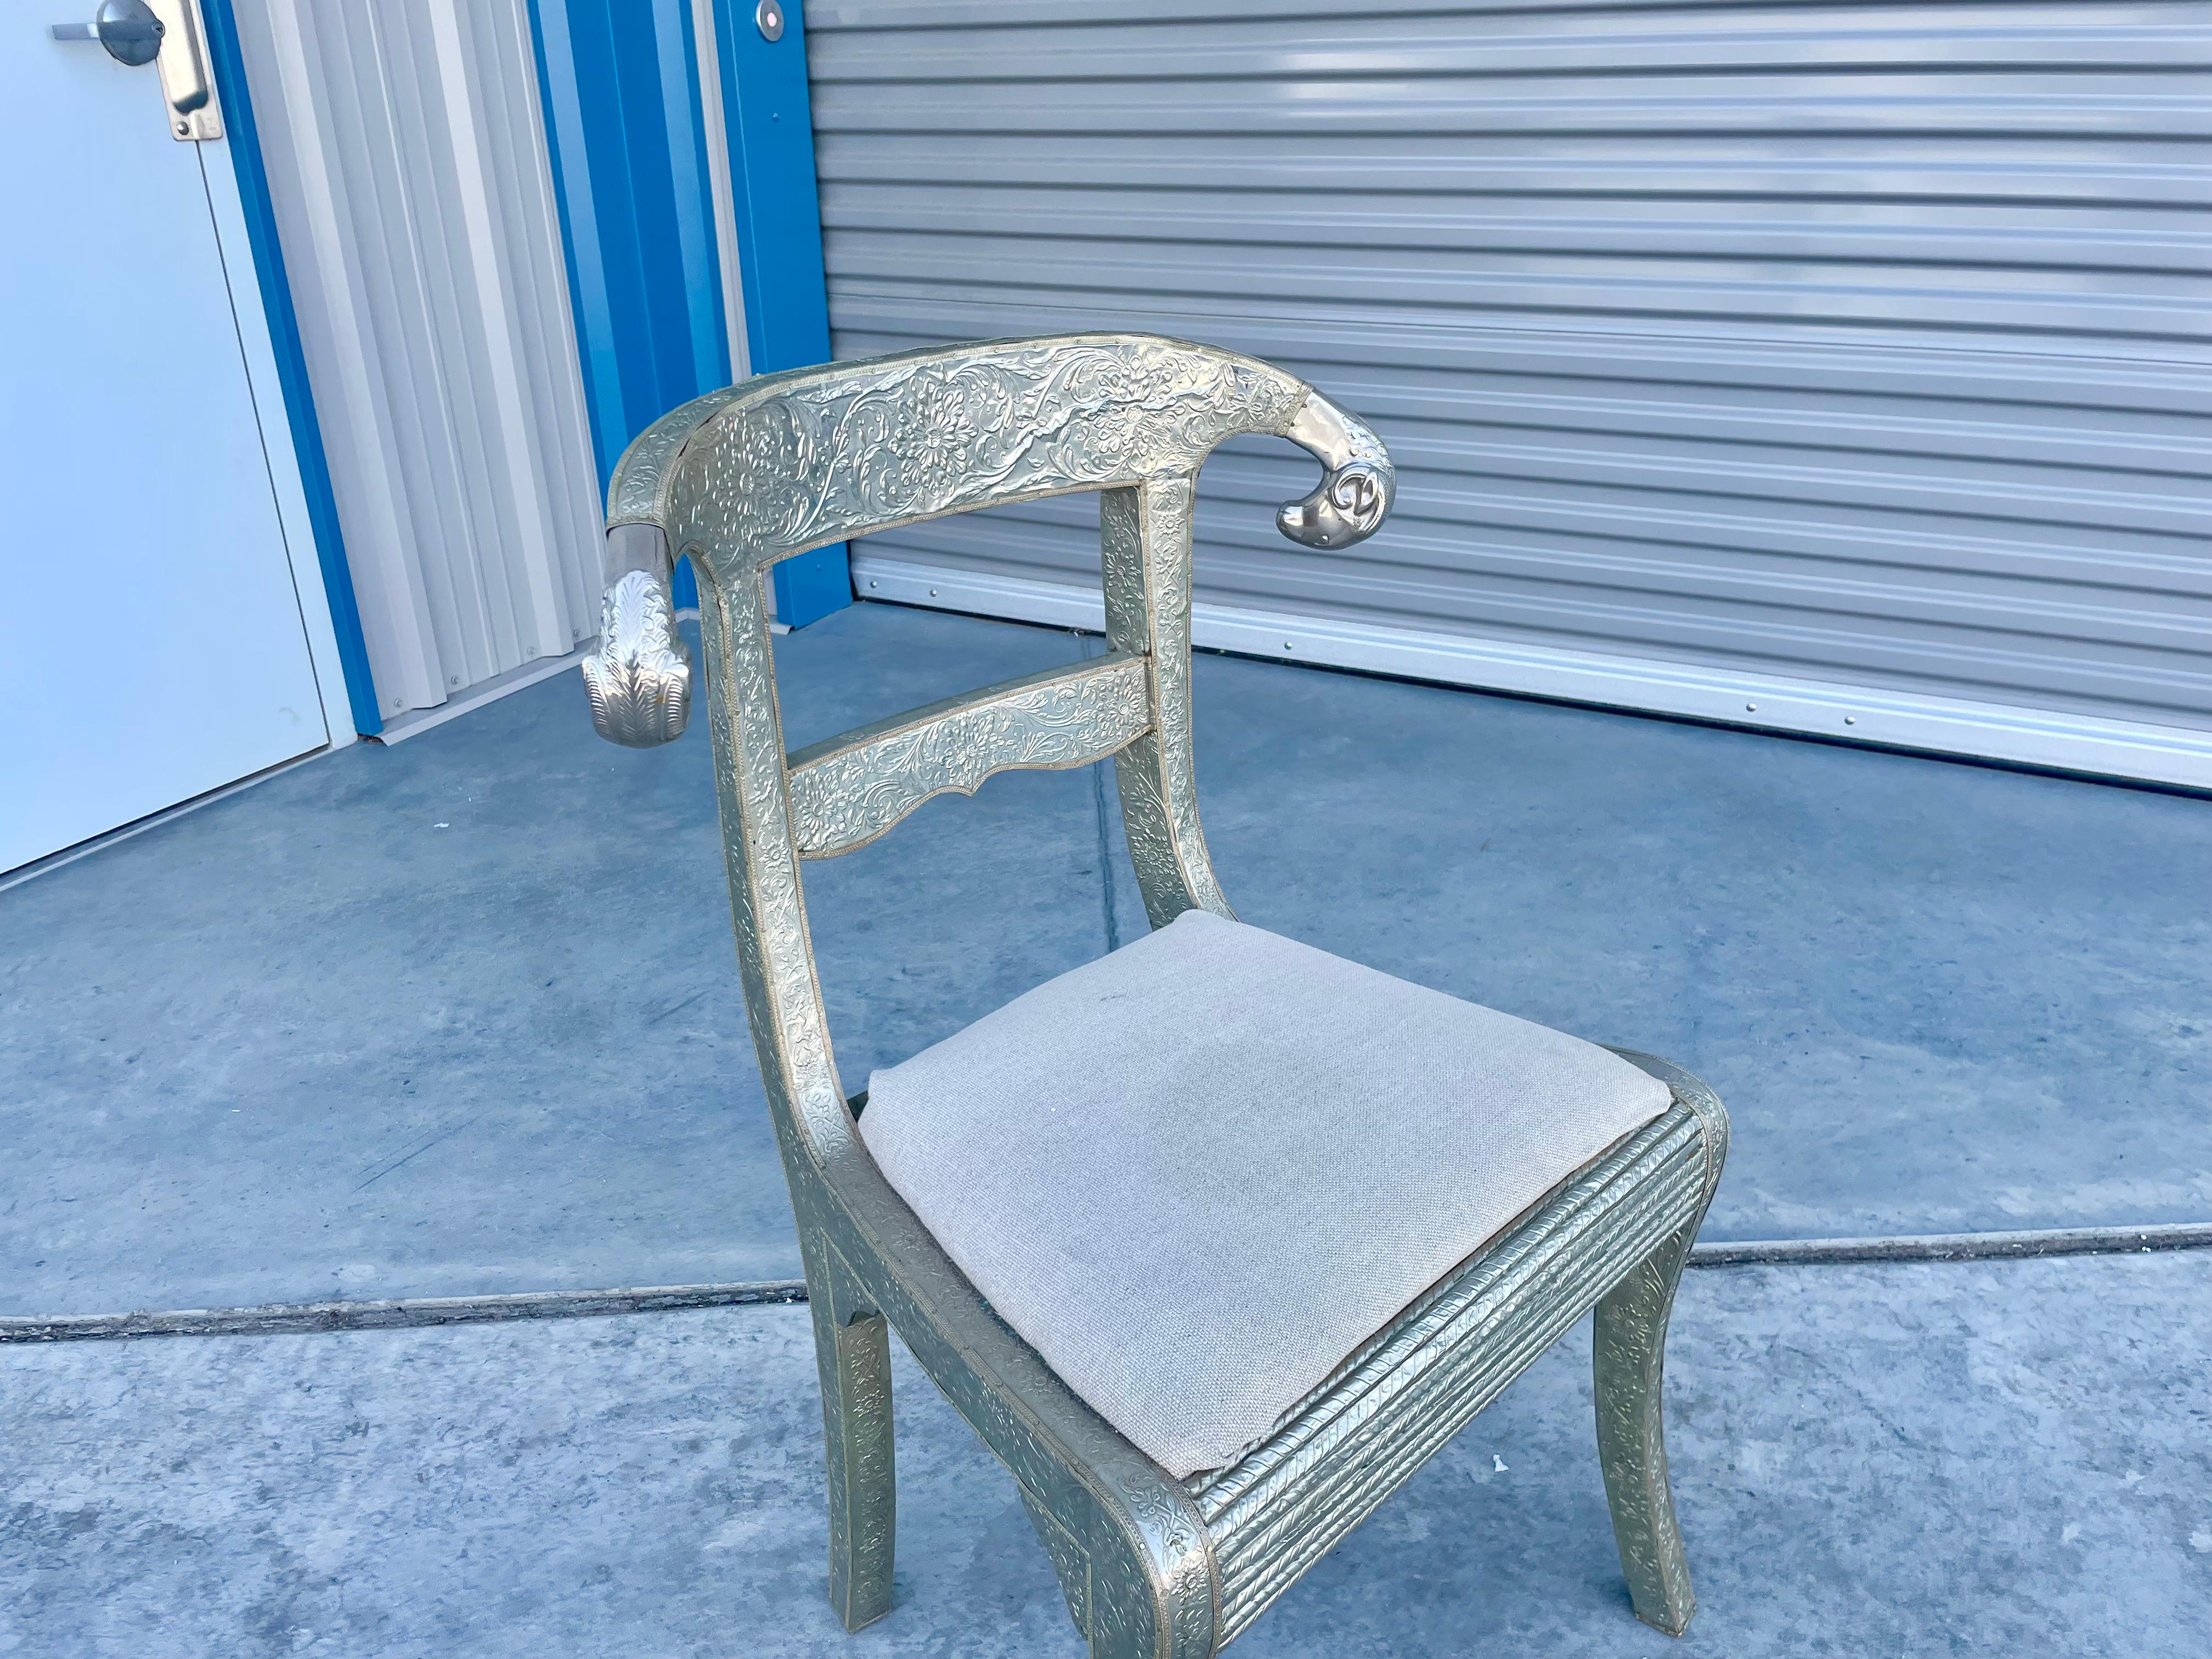 Vintage metal-wrapped ram chair designed and manufactured in India circa 1980s. This beautiful chair is also called a wedding chair. It features a wooden frame wrapped in silver metal and polished ram heads on the sides, giving it a great